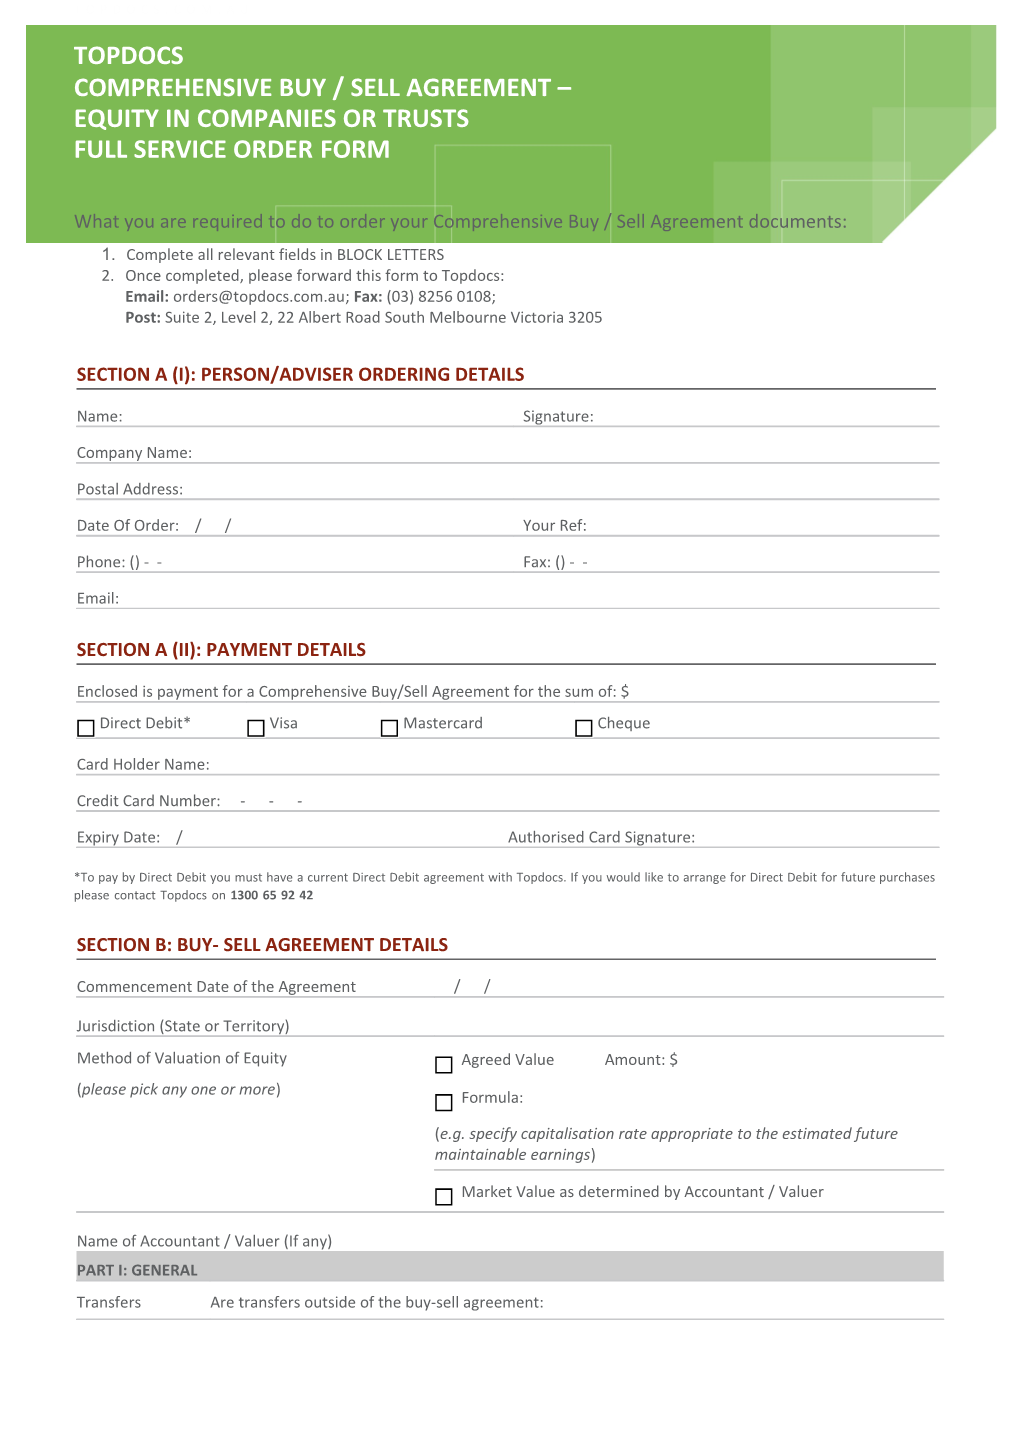 Comprehensive Buy/Sell Agreement Fullserviceorderform Page 1Of 7